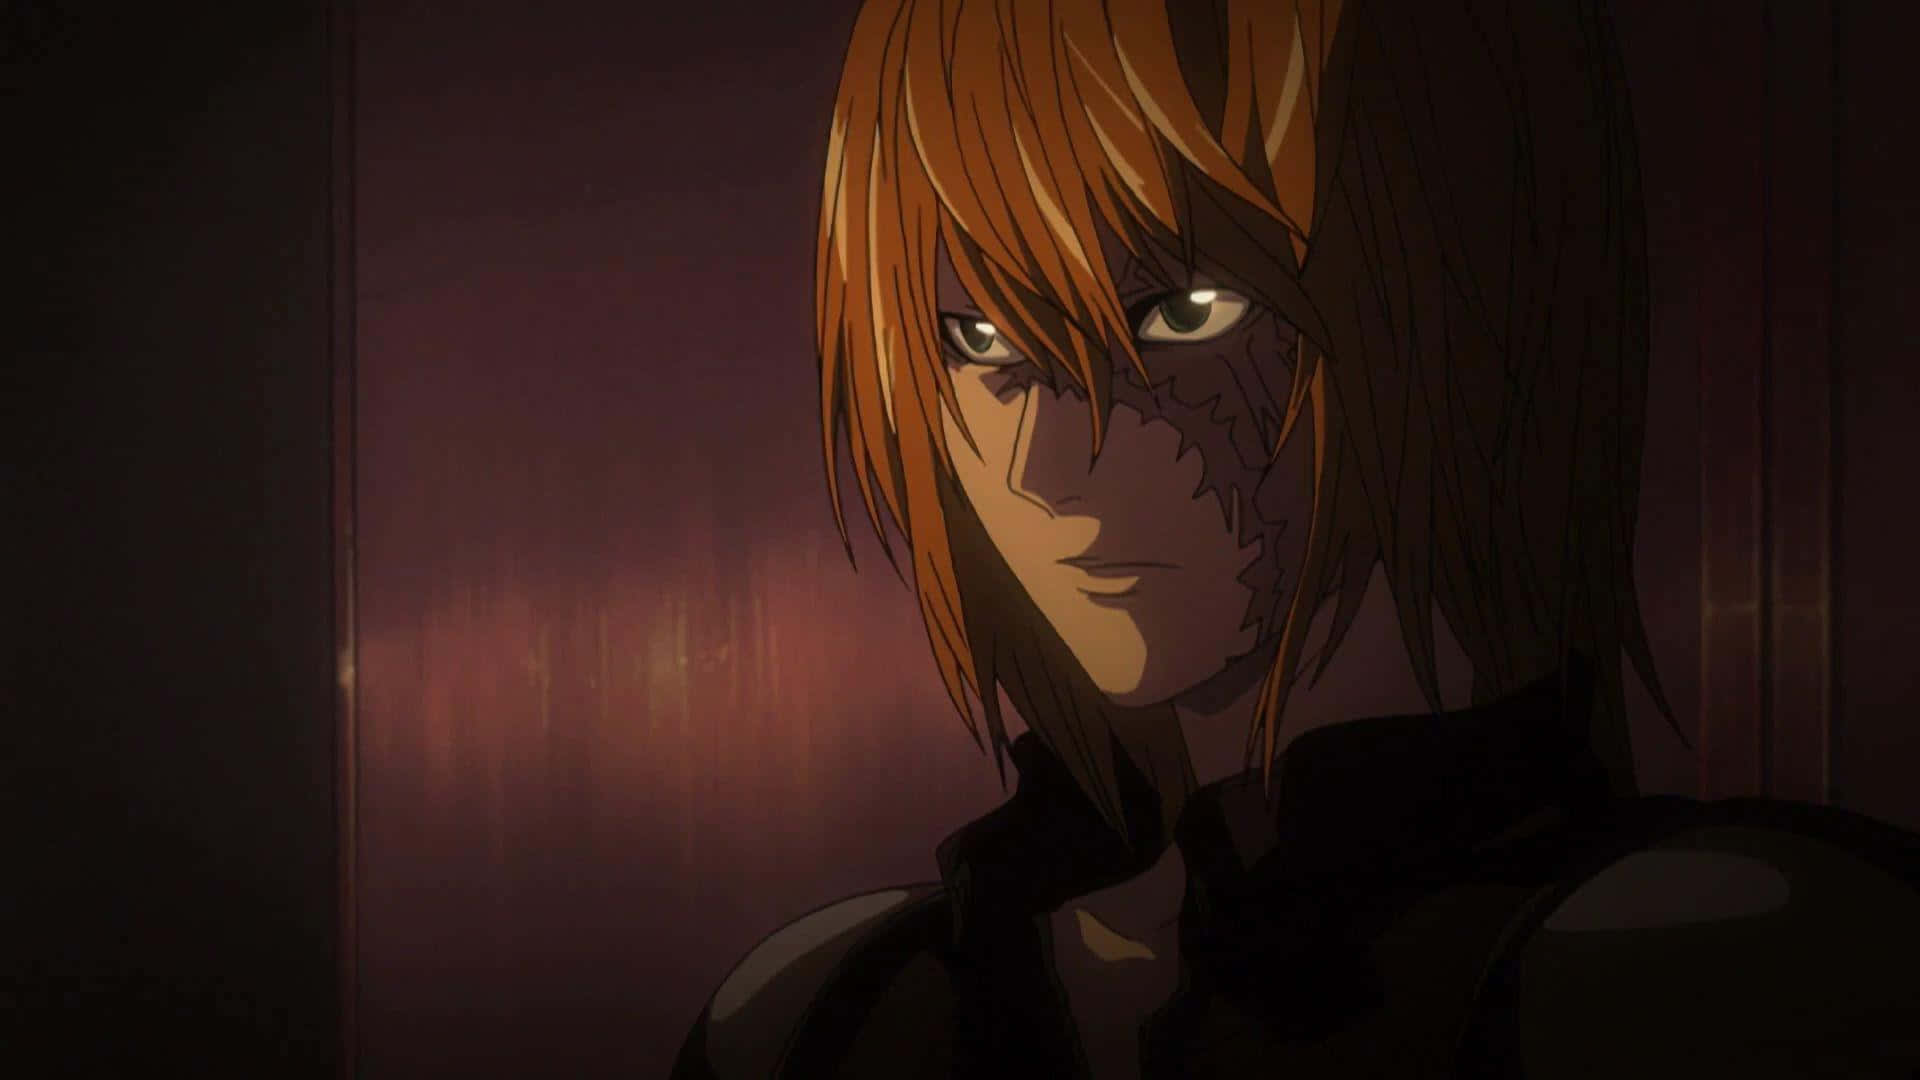 Mello from Death Note looking fierce in the shadows Wallpaper